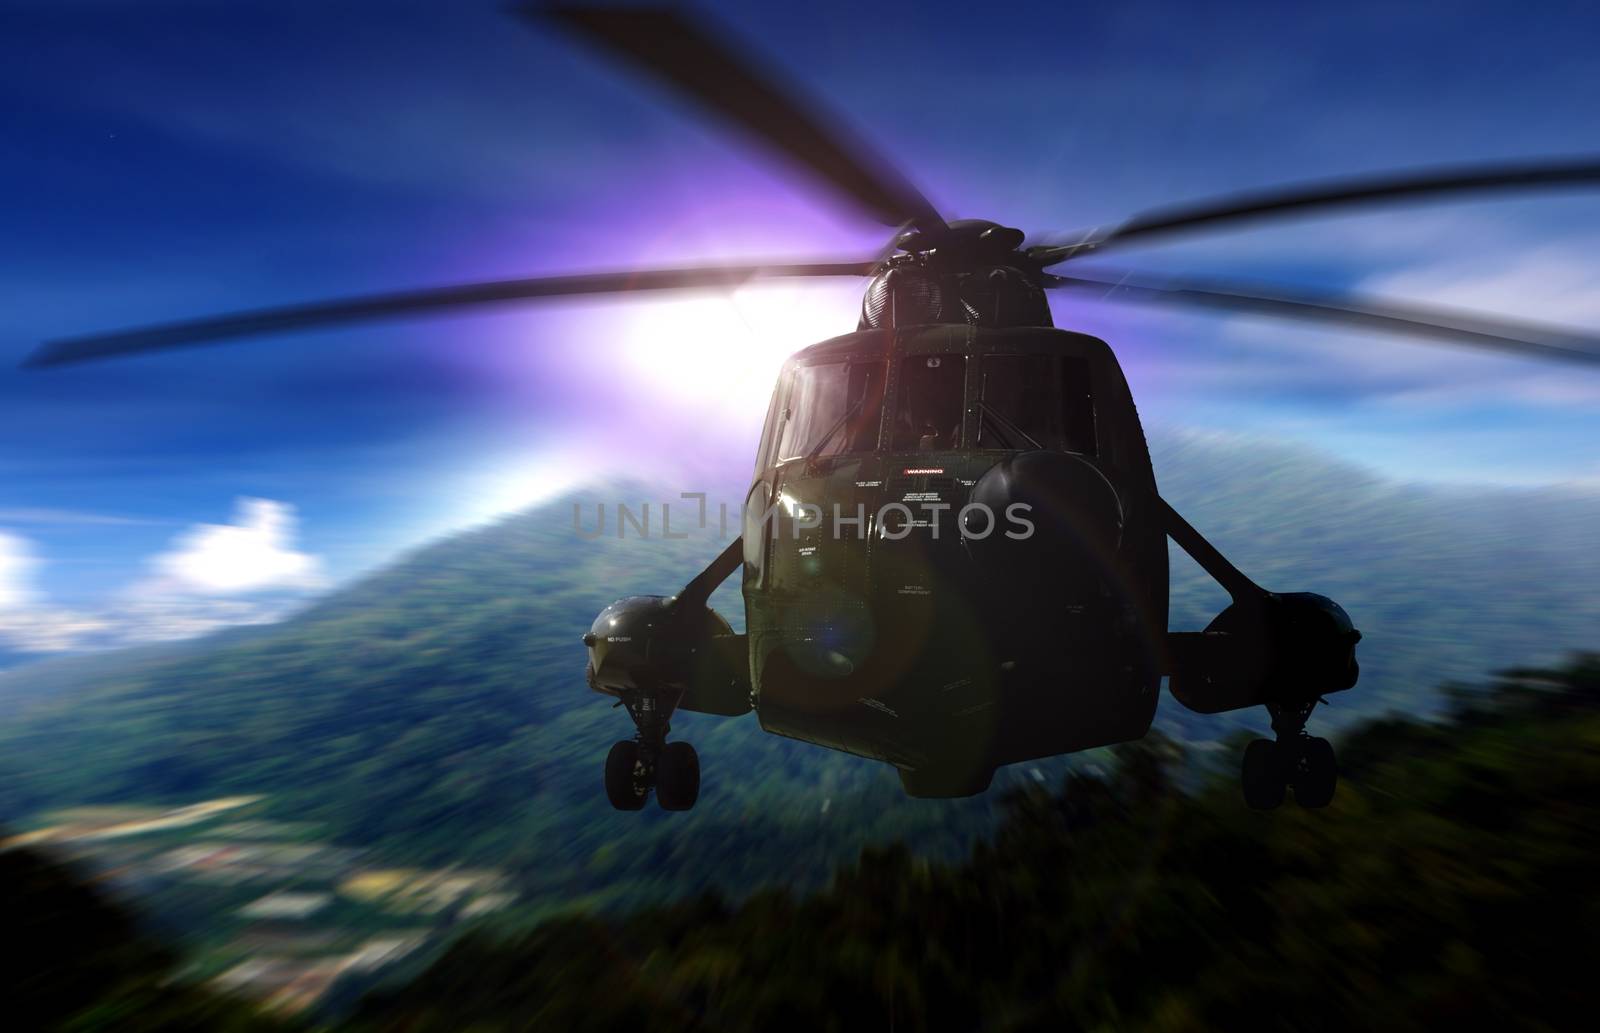 Helicopter on a rescue mission in a mountain